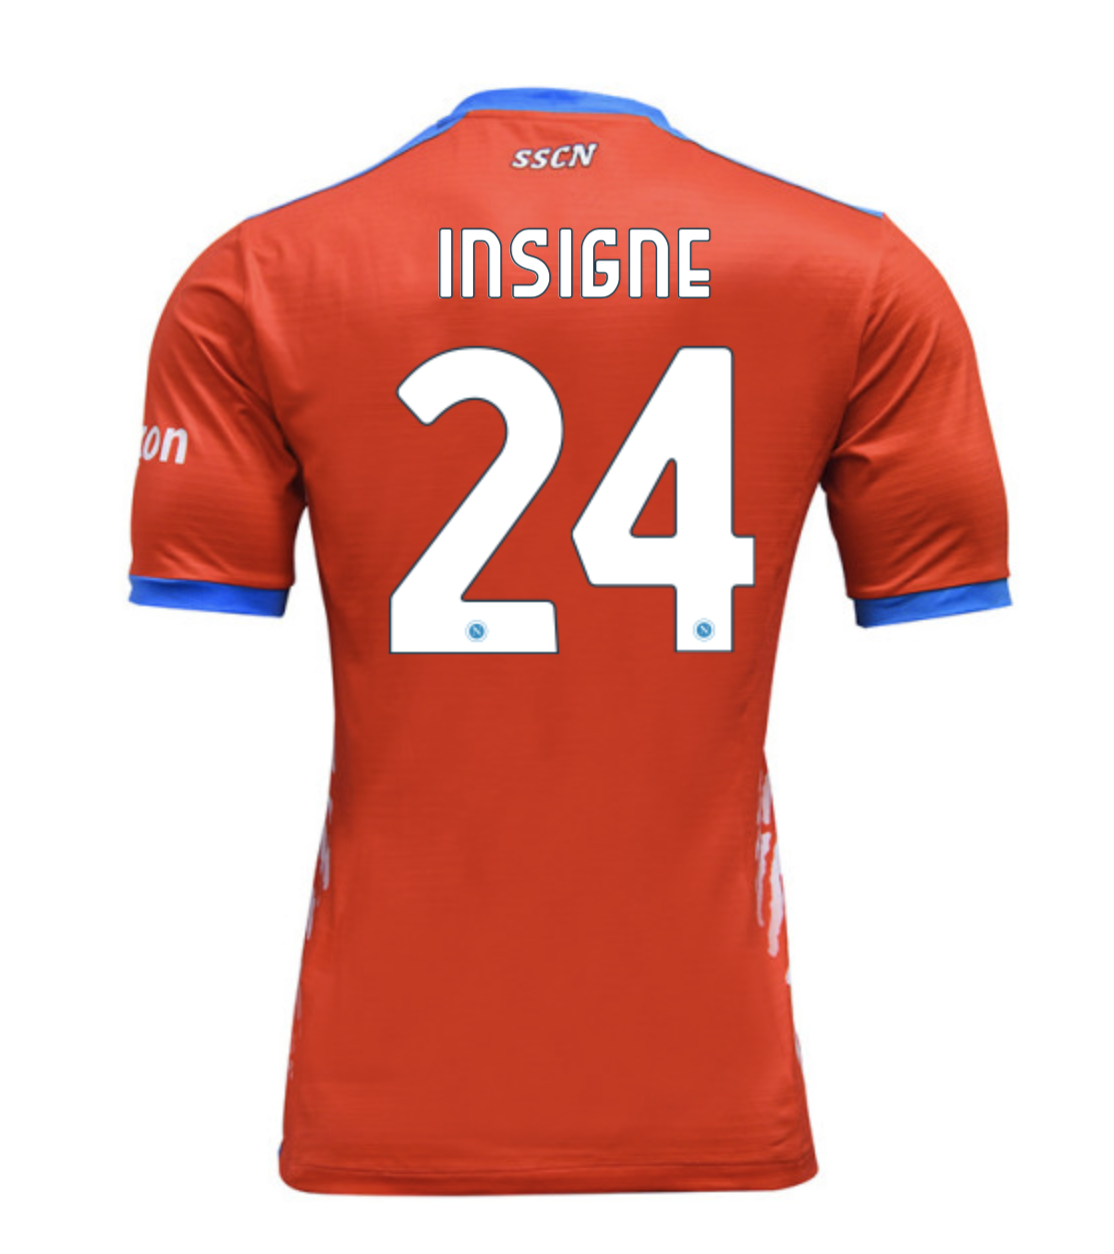 Napoli Pay Tribute Maradona #24 Insigne Limited Edition Red Jersey